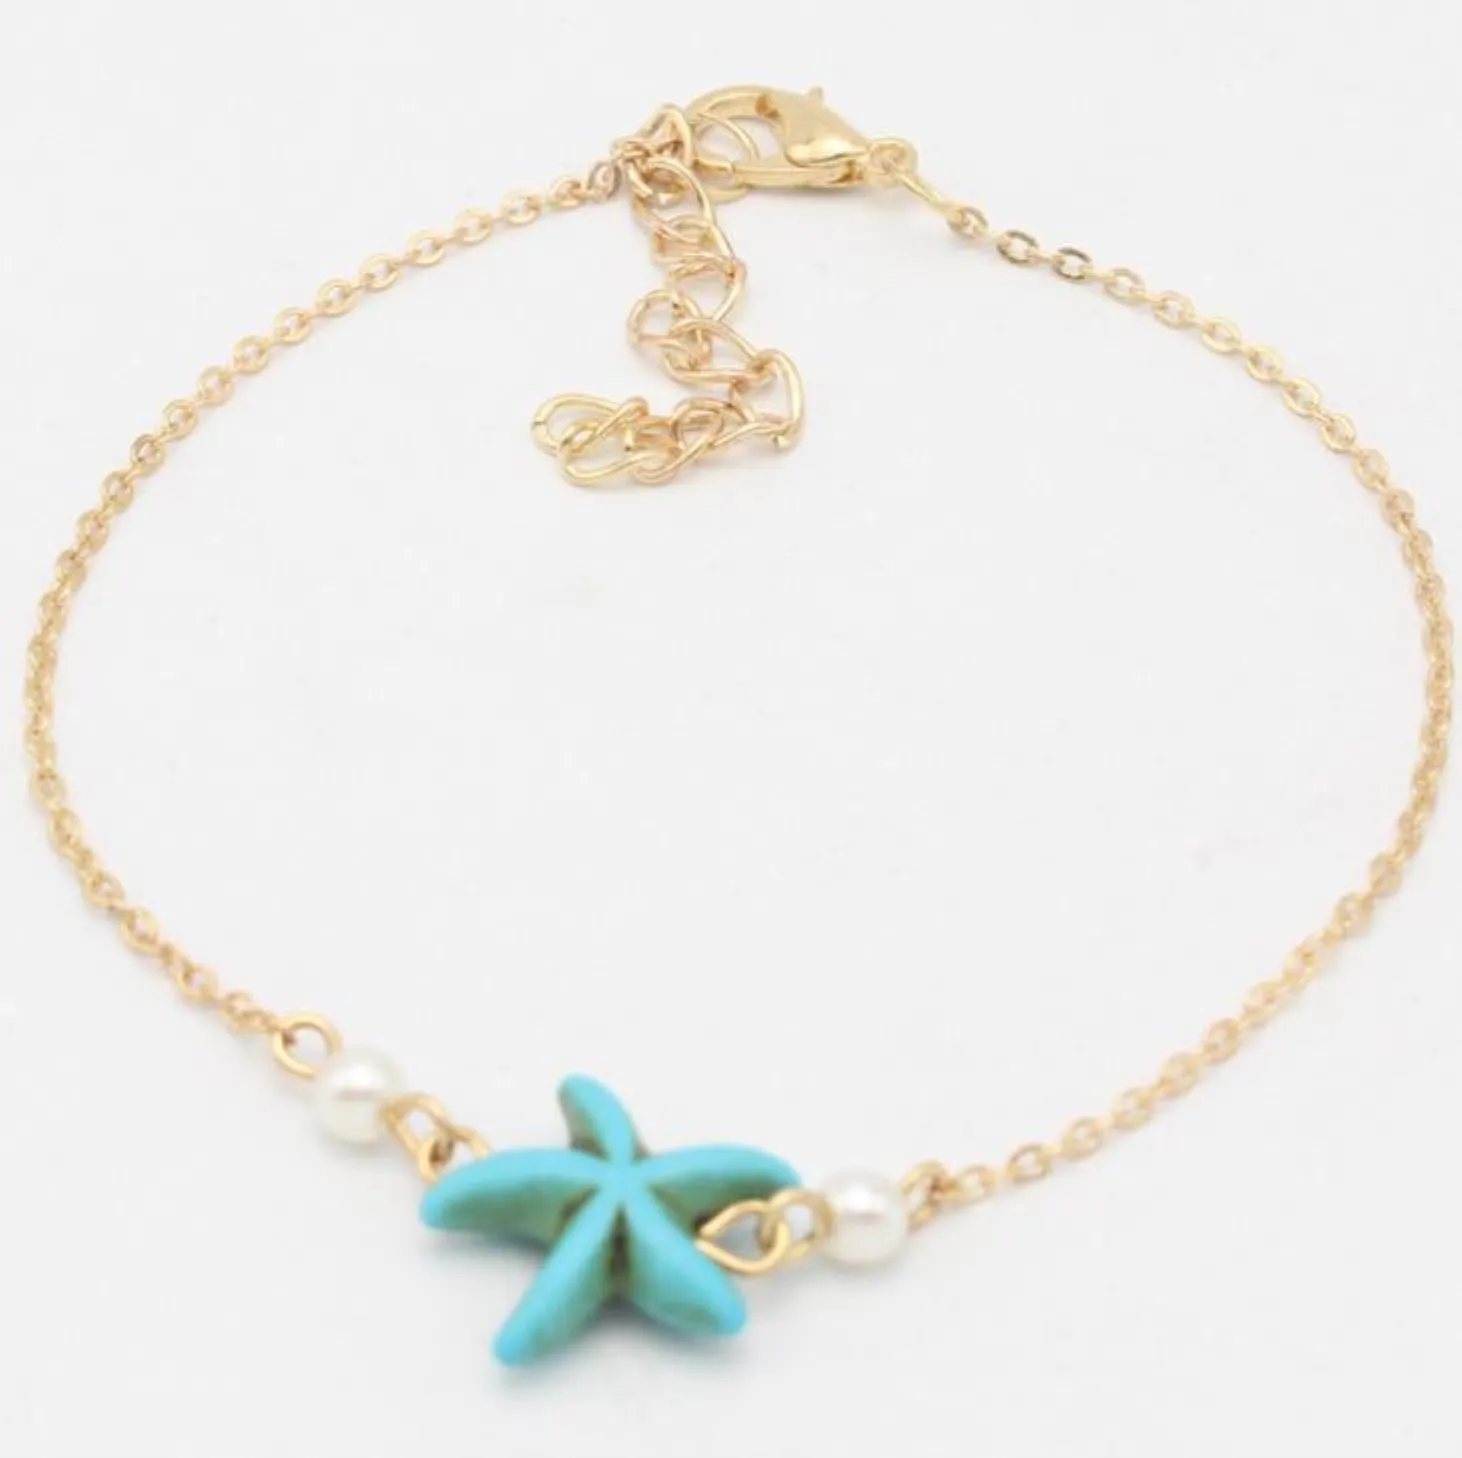 Simple Gold Indian Anklet Designs Pearl Anklet Bracelets For Women Ladies Fake Turquoise Starfish Anklets Jewelry Freeshipping